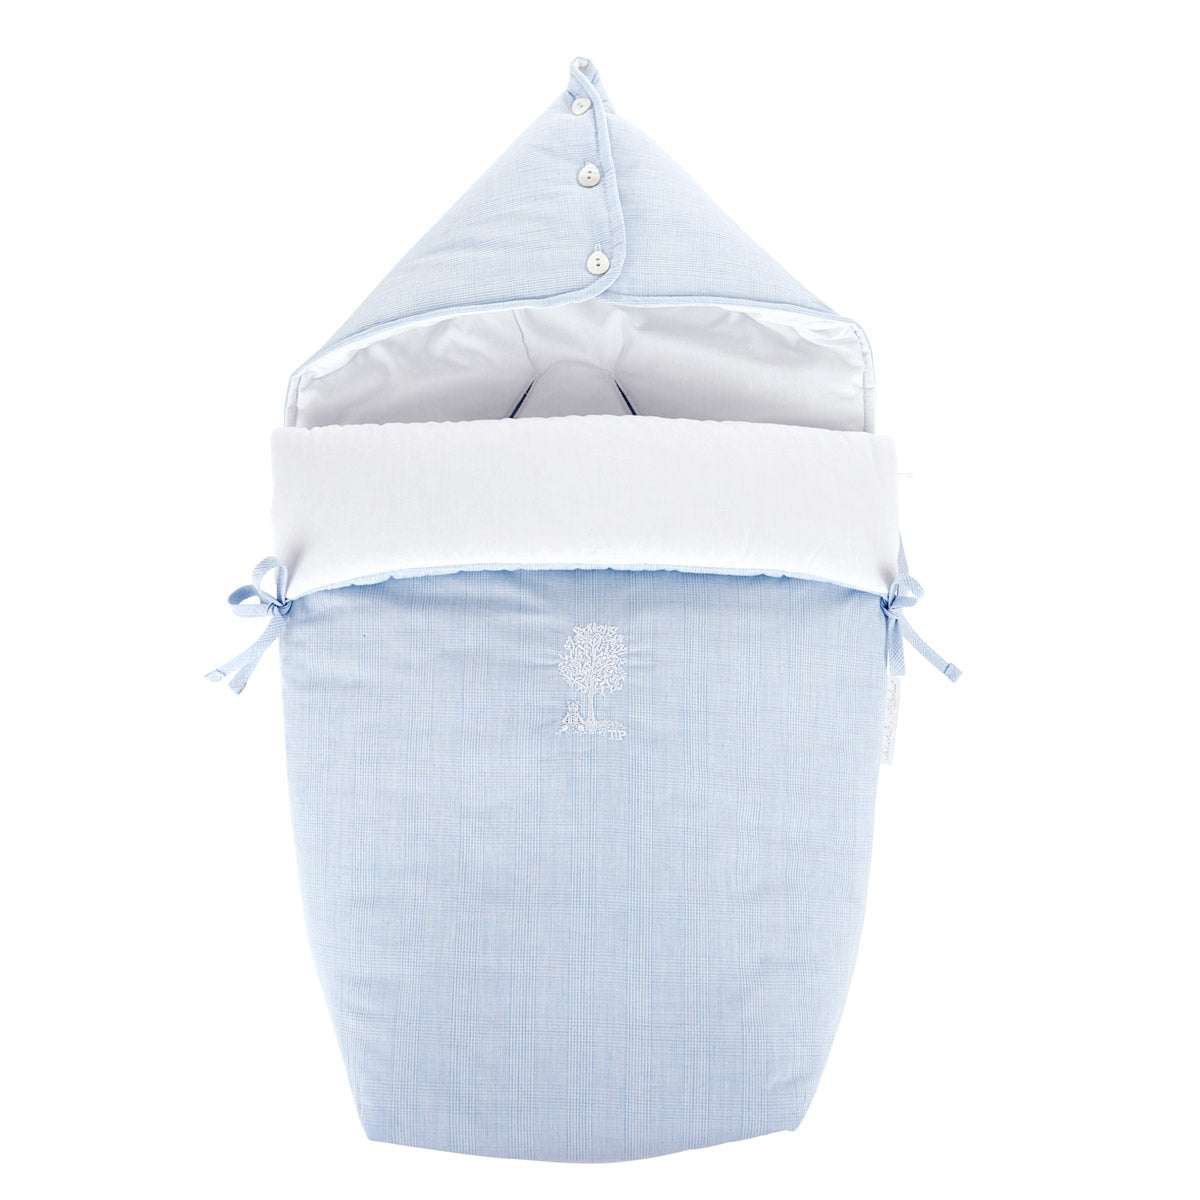 Theophile & Patachou Hooded Sleeping Bag for Car Seat “Pebble Pro” - Sweet Blue